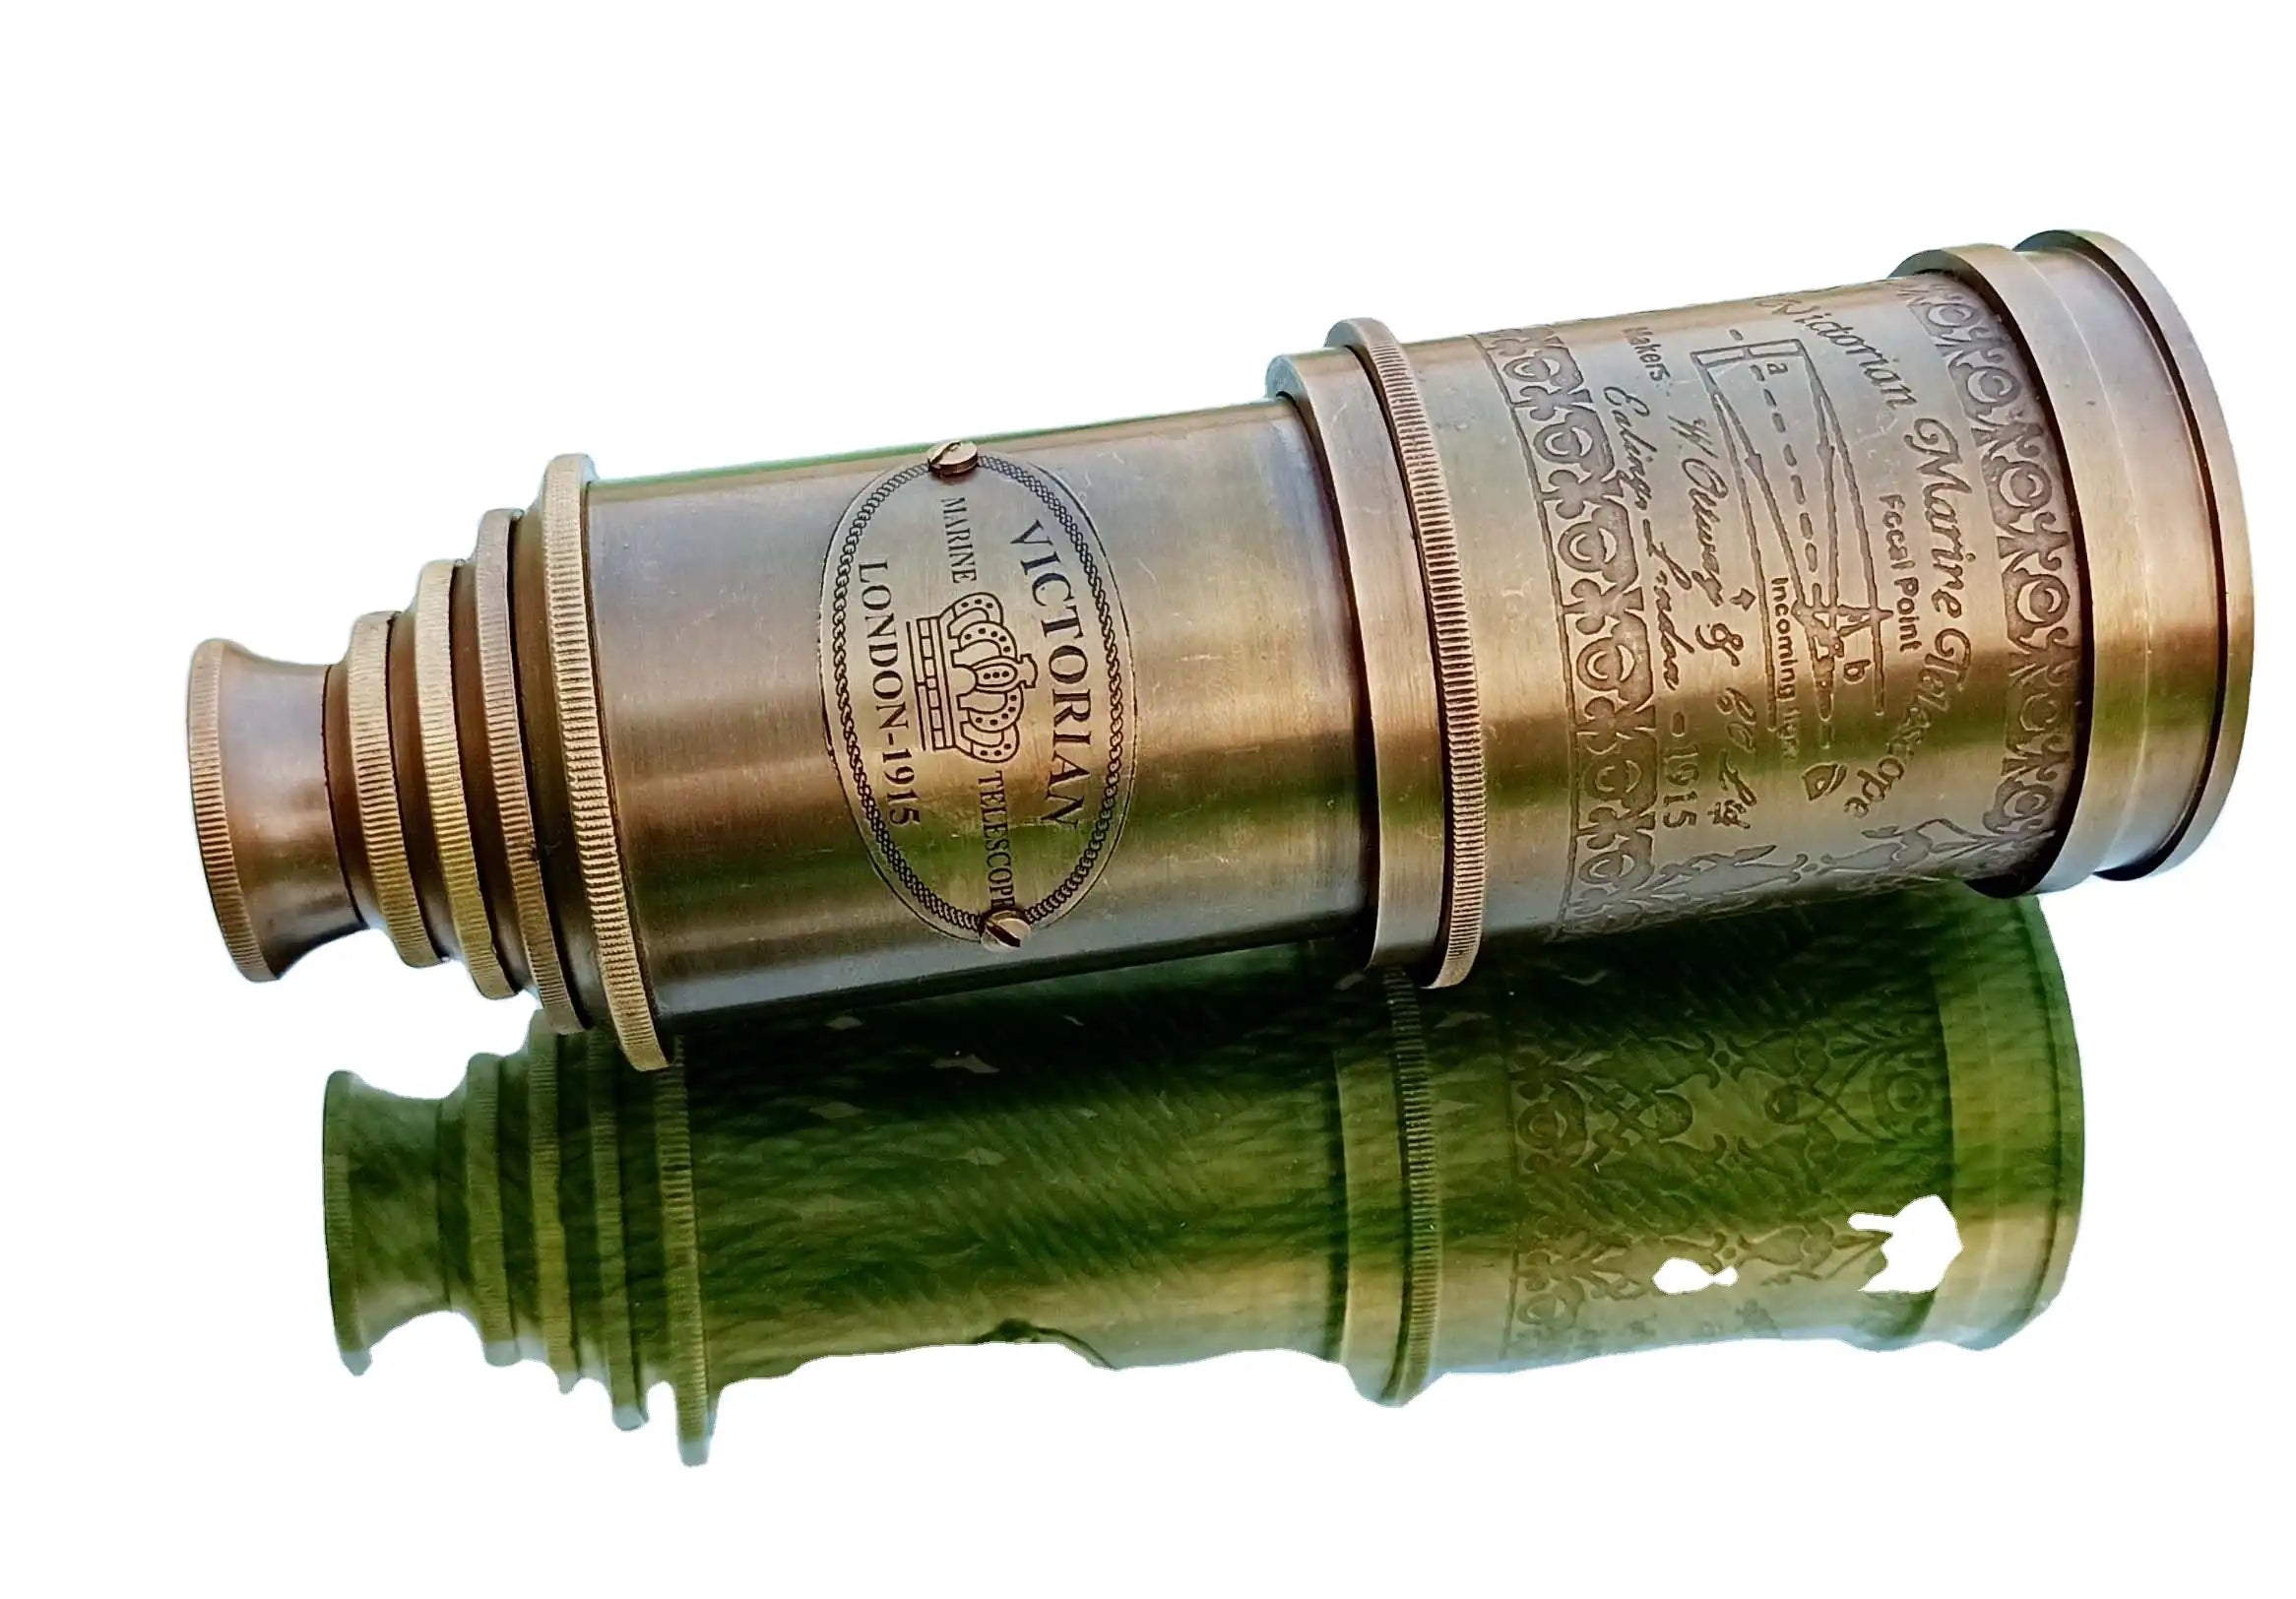 Engraved Nautical Pirate Handheld Spyglass Brass Telescope with Wooden Gift Box